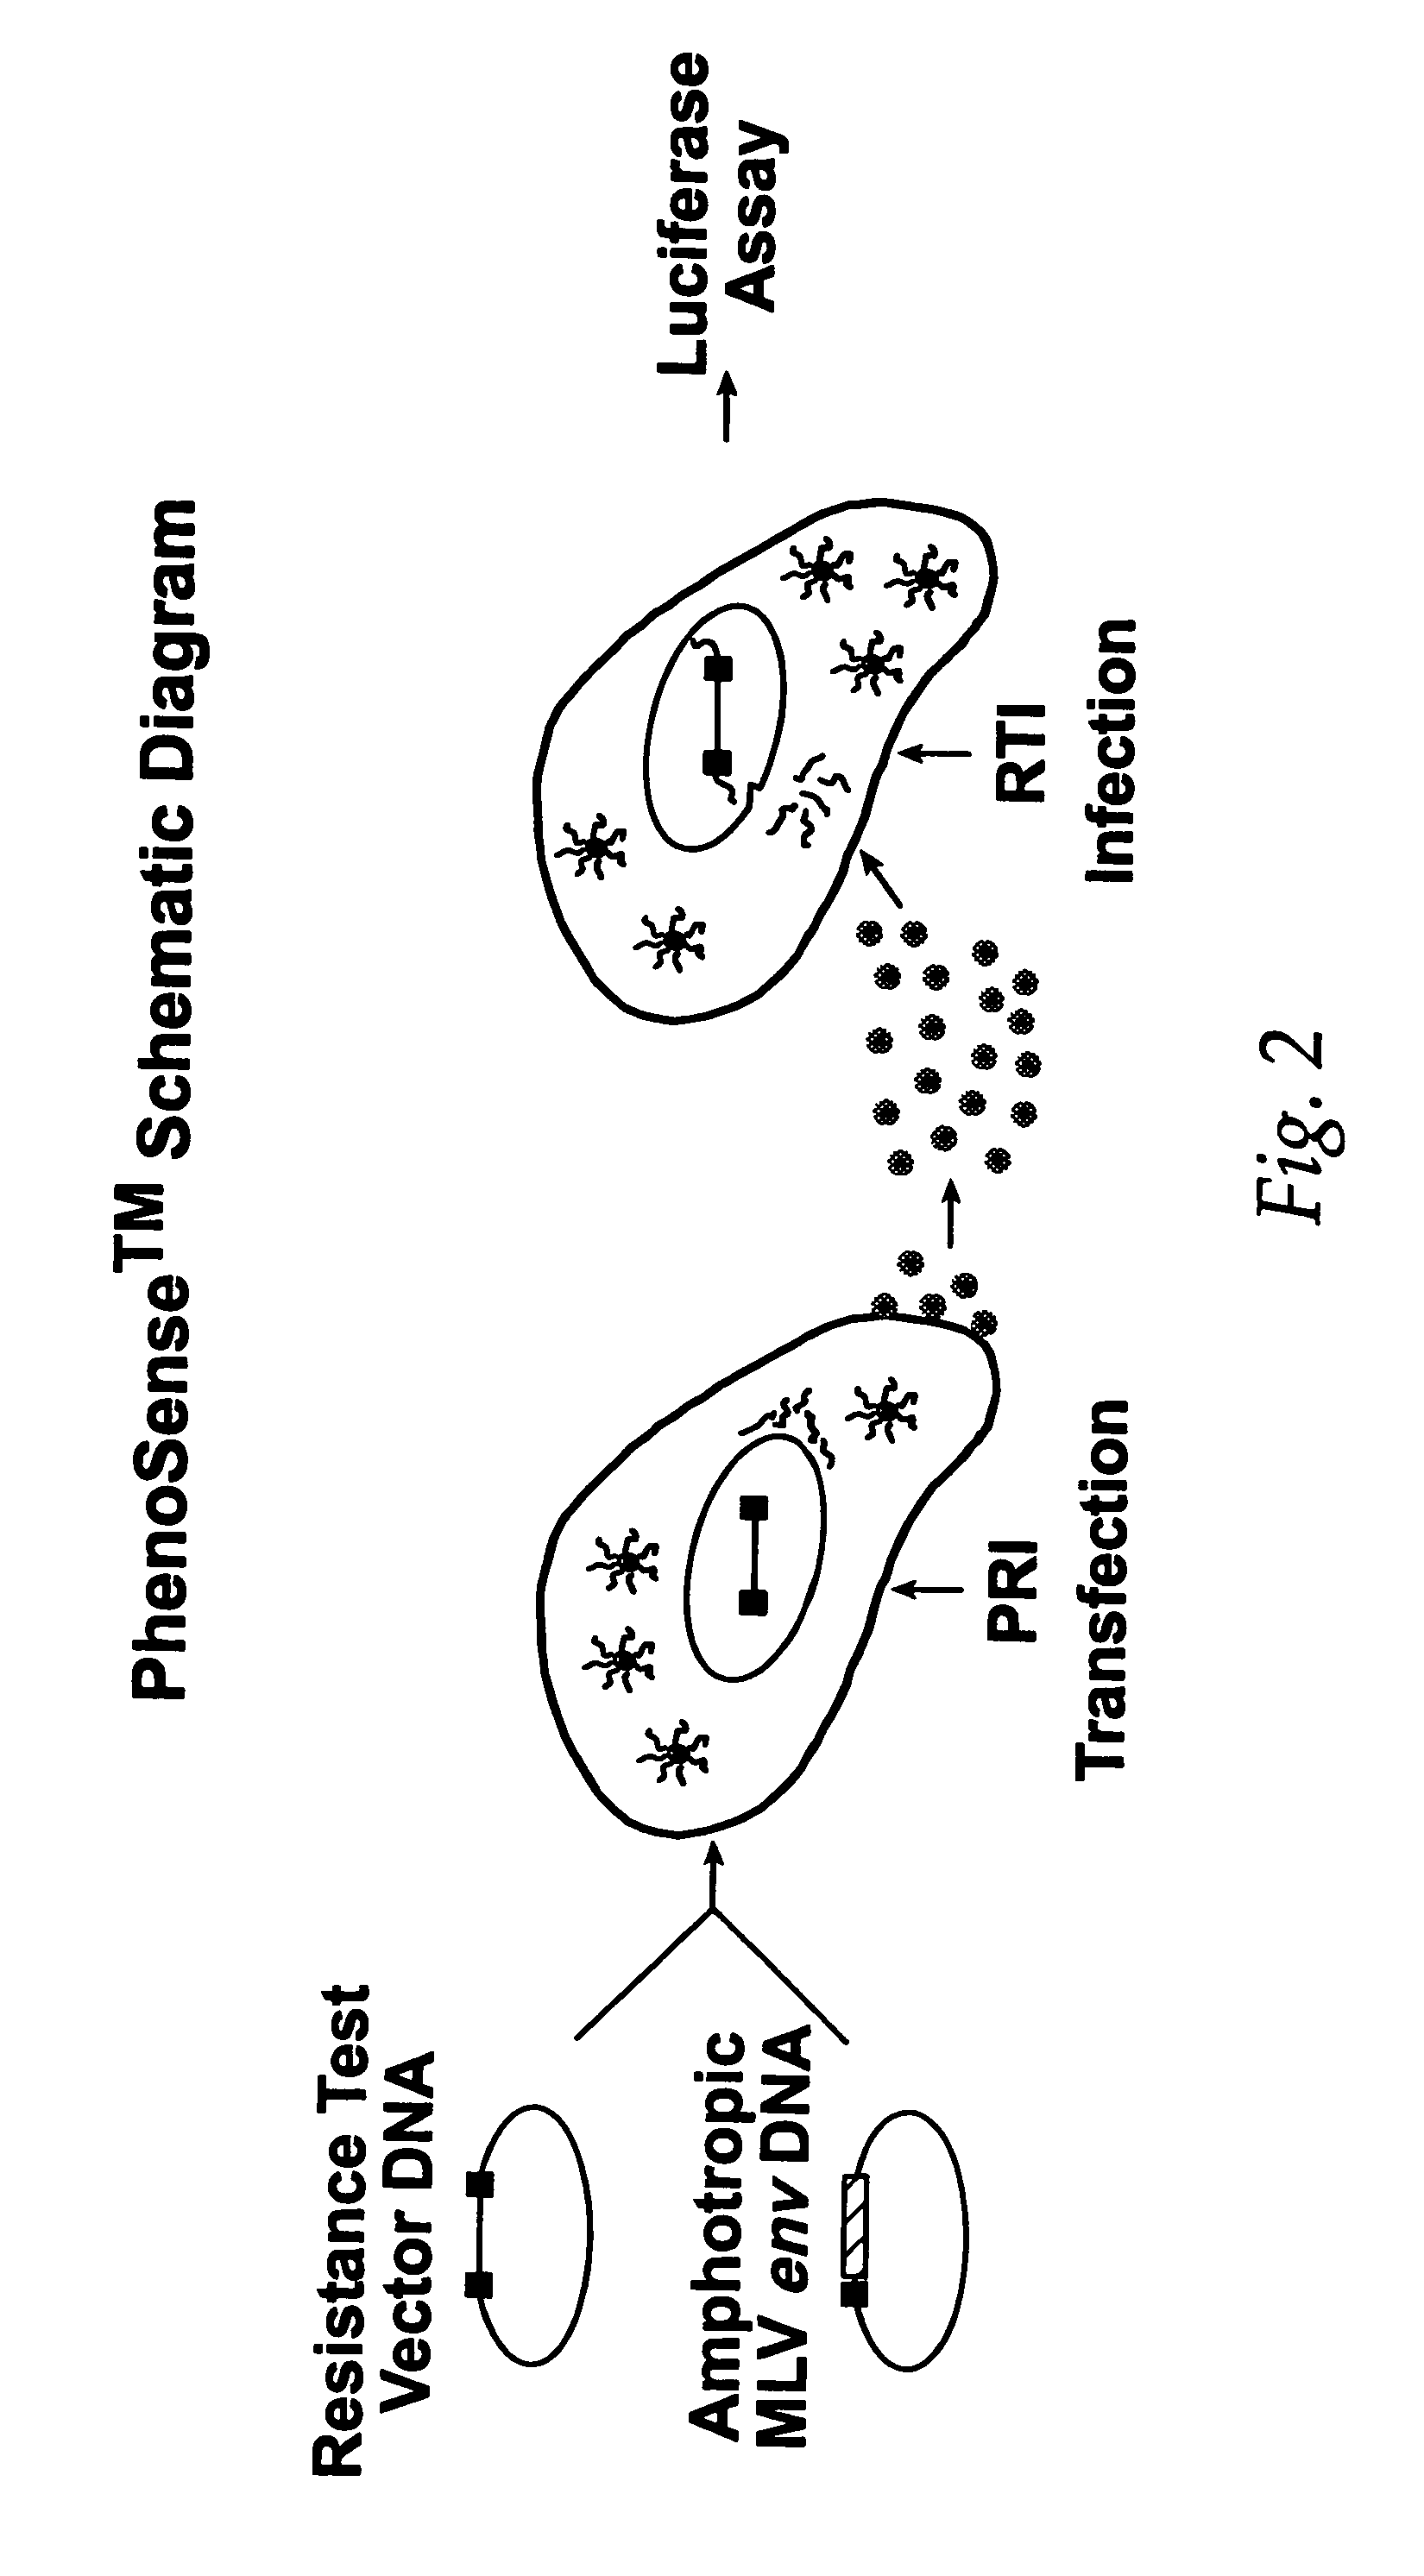 Means and methods for monitoring protease inhibitor antiretroviral therapy and guiding therapeutic decisions in the treatment of HIV/AIDS